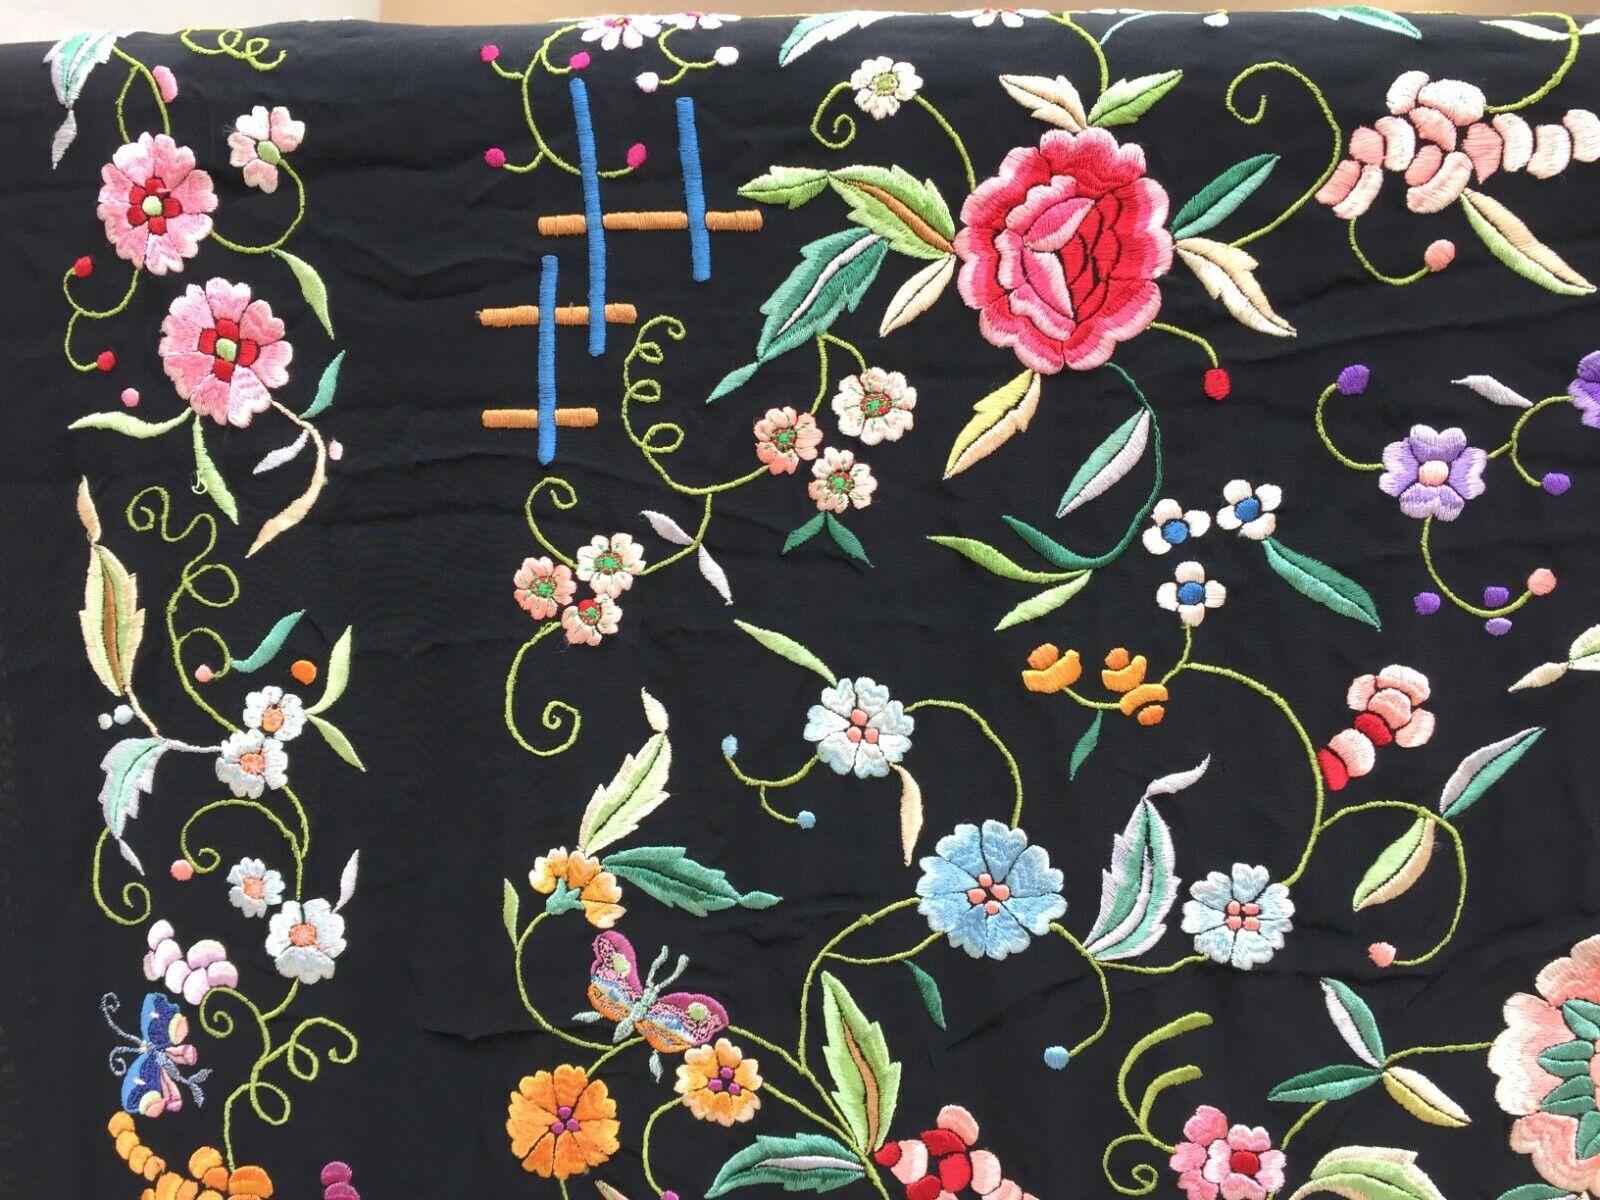 Handmade Vintage Chinese Silk Shawl 5.2' x 5.3', 1950s - 1W03 For Sale 2